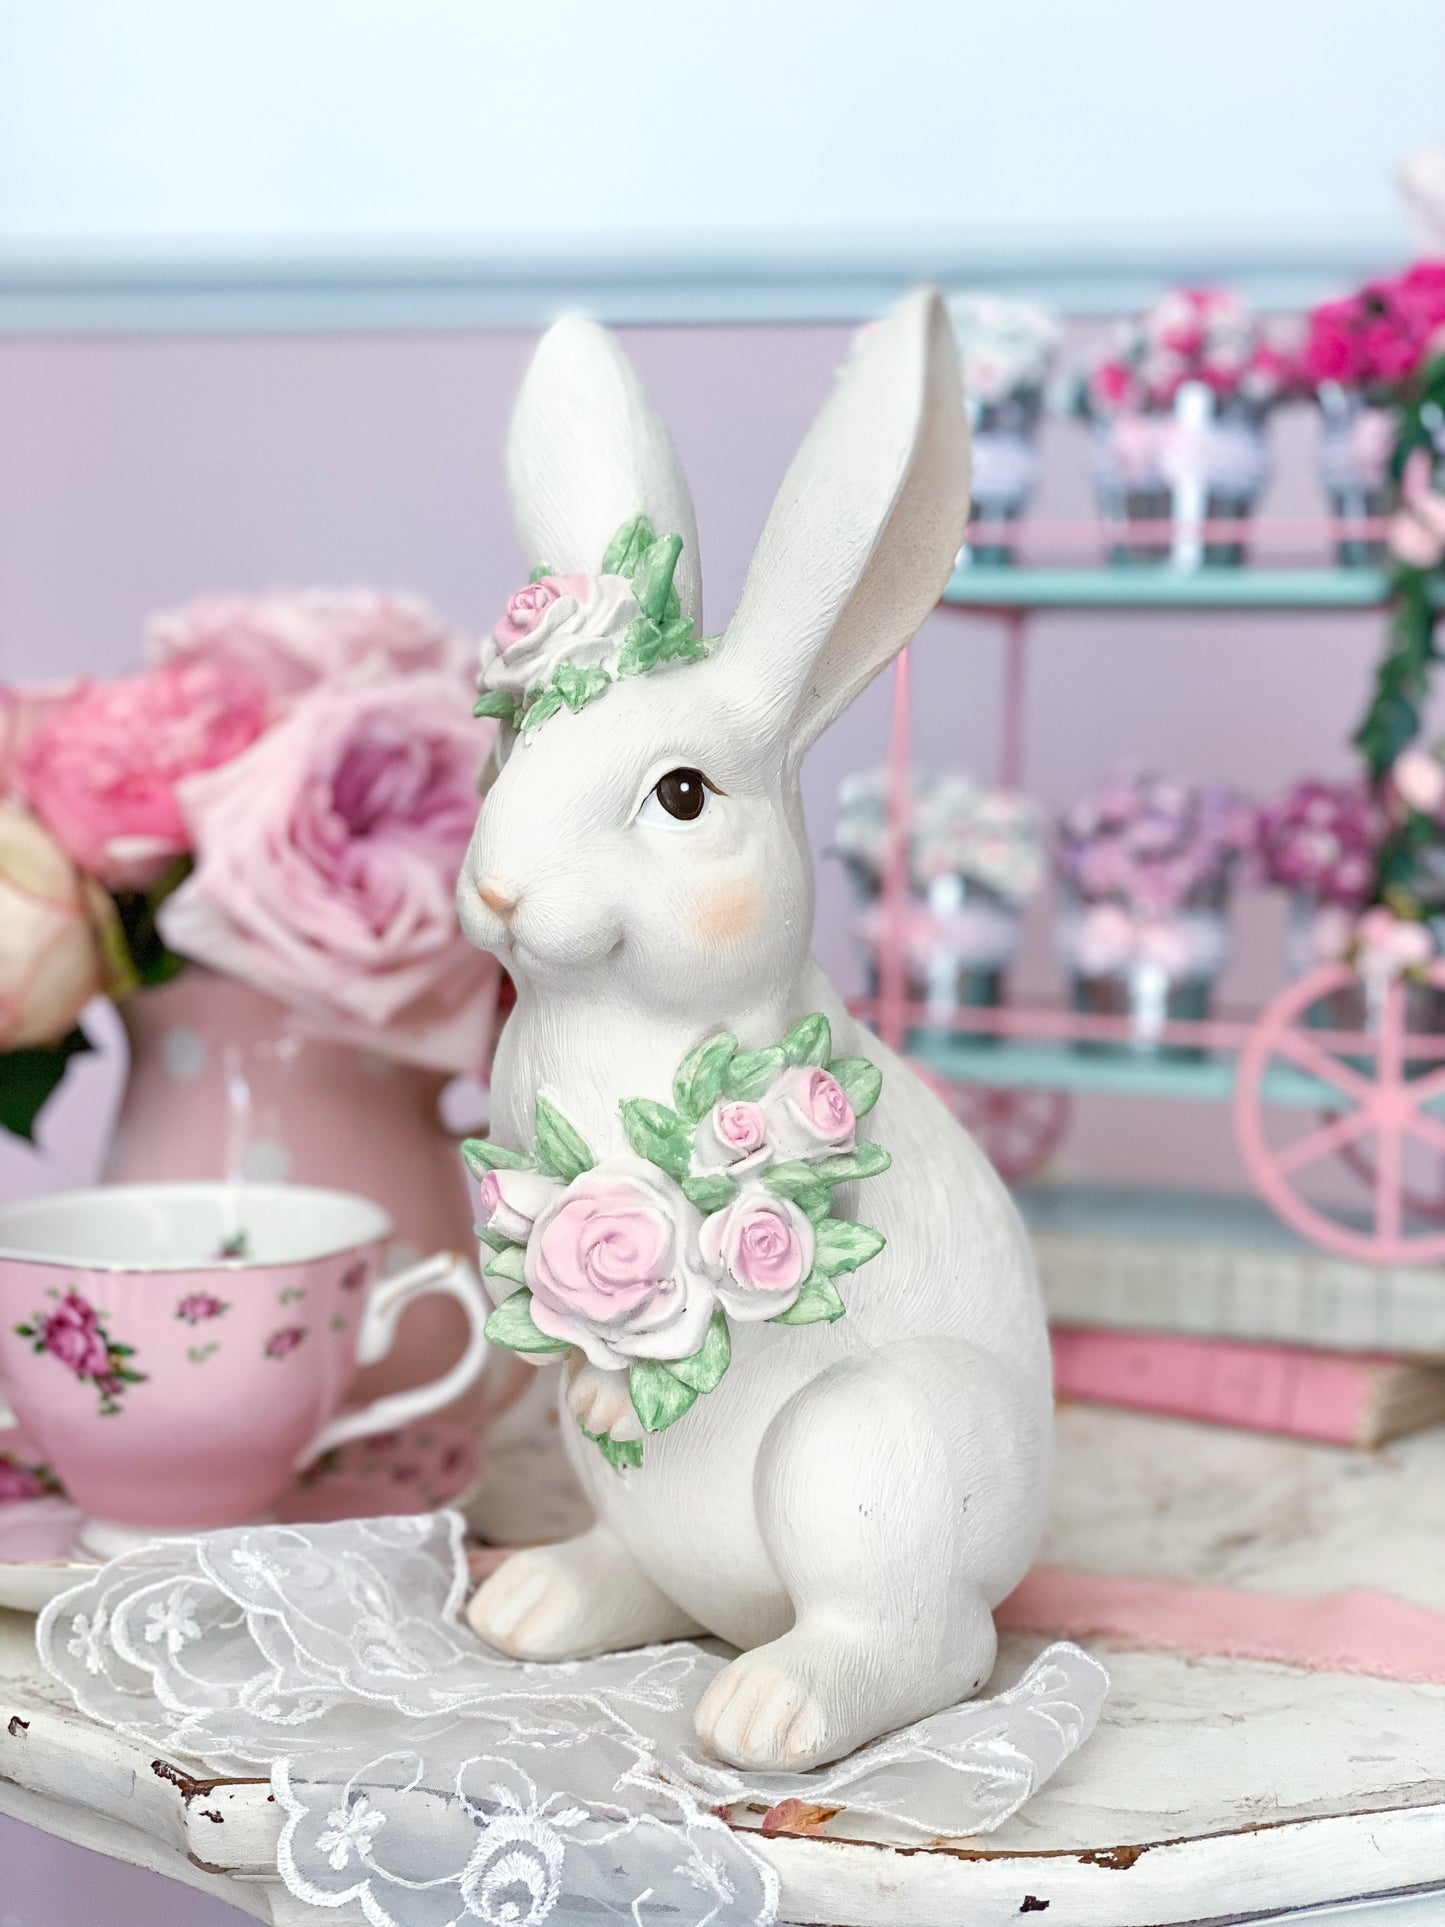 Shabby Chic Grand Millennial Easter Bunny with Pastel Pink Roses Figurine